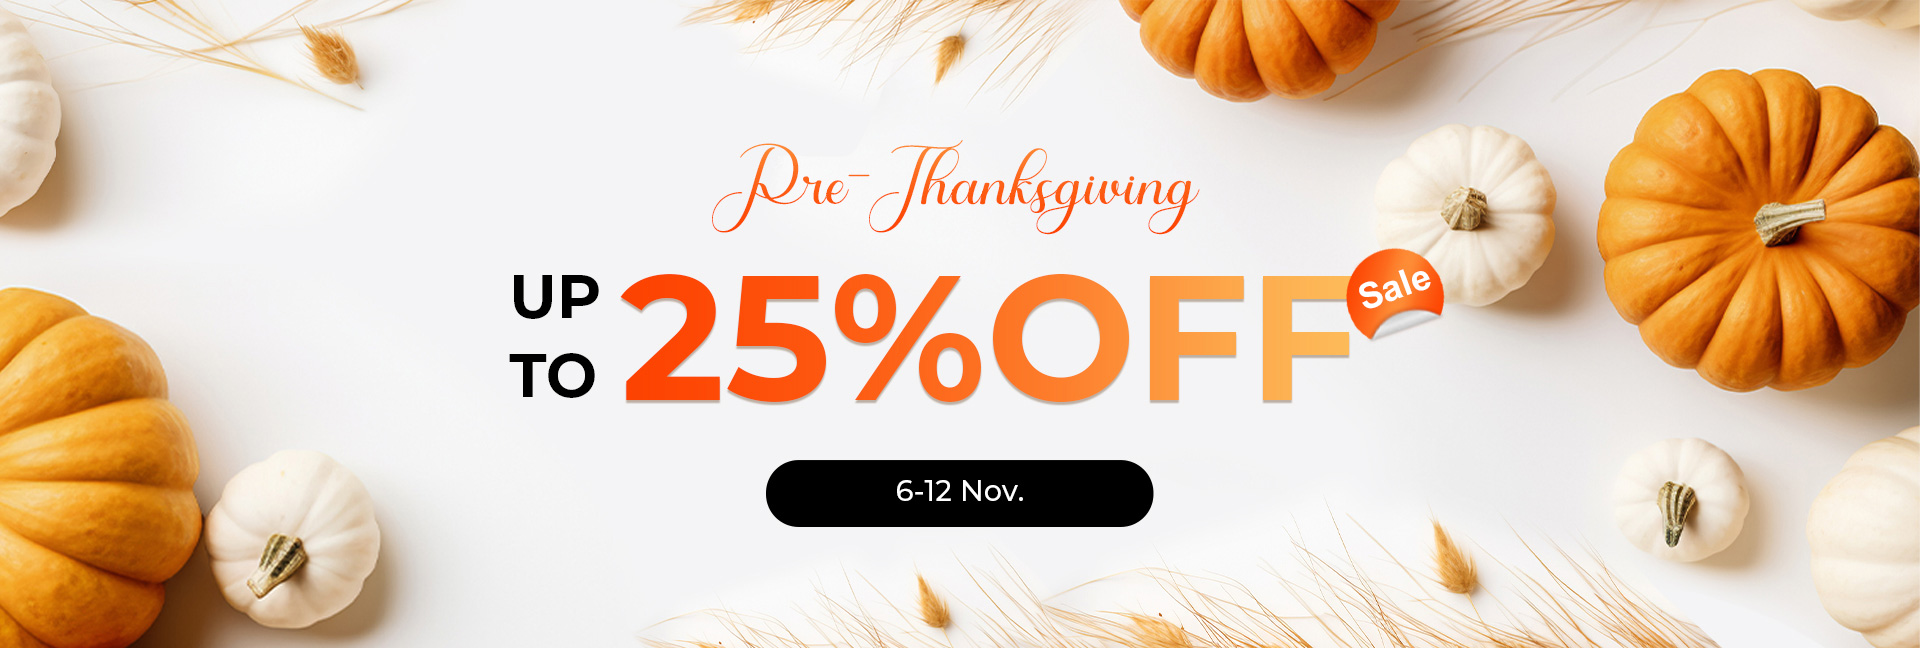 Pre thanksgiving up to 25%